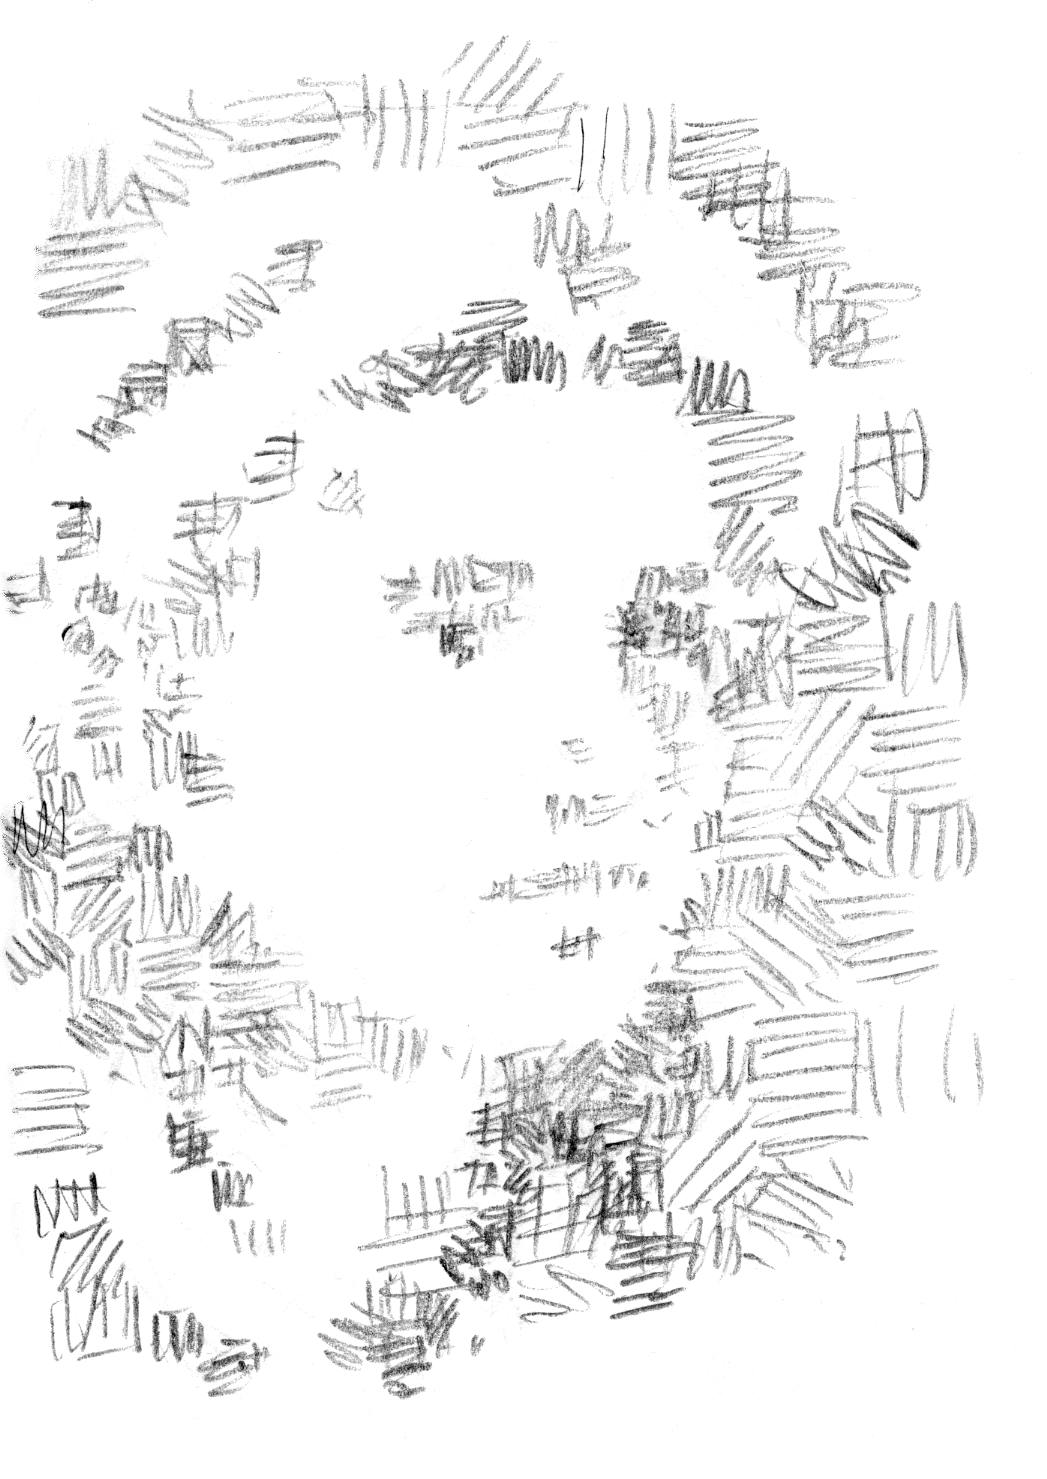 a glom of hash marks suggesting the outline of a human